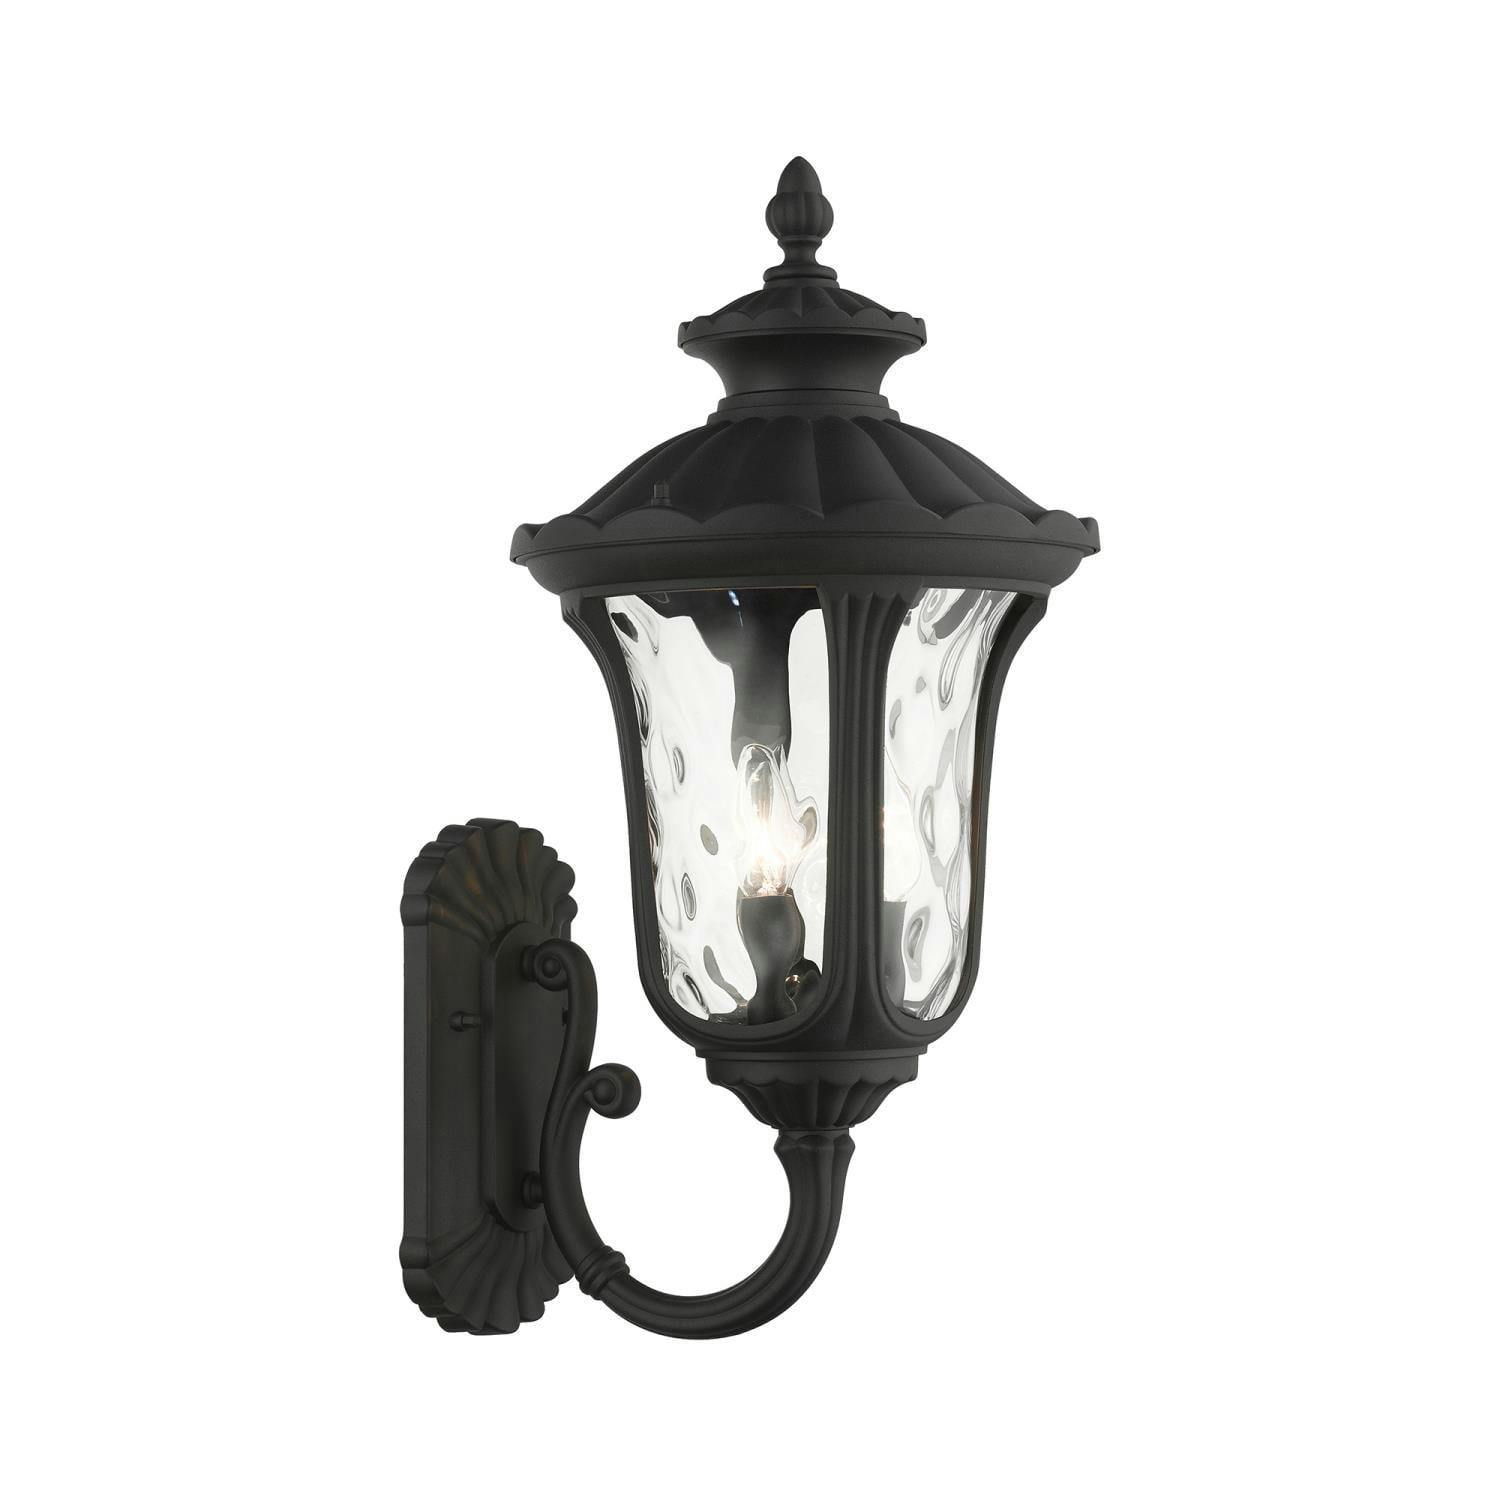 Artisanal Textured Black 3-Light Outdoor Lantern Sconce with Clear Water Glass